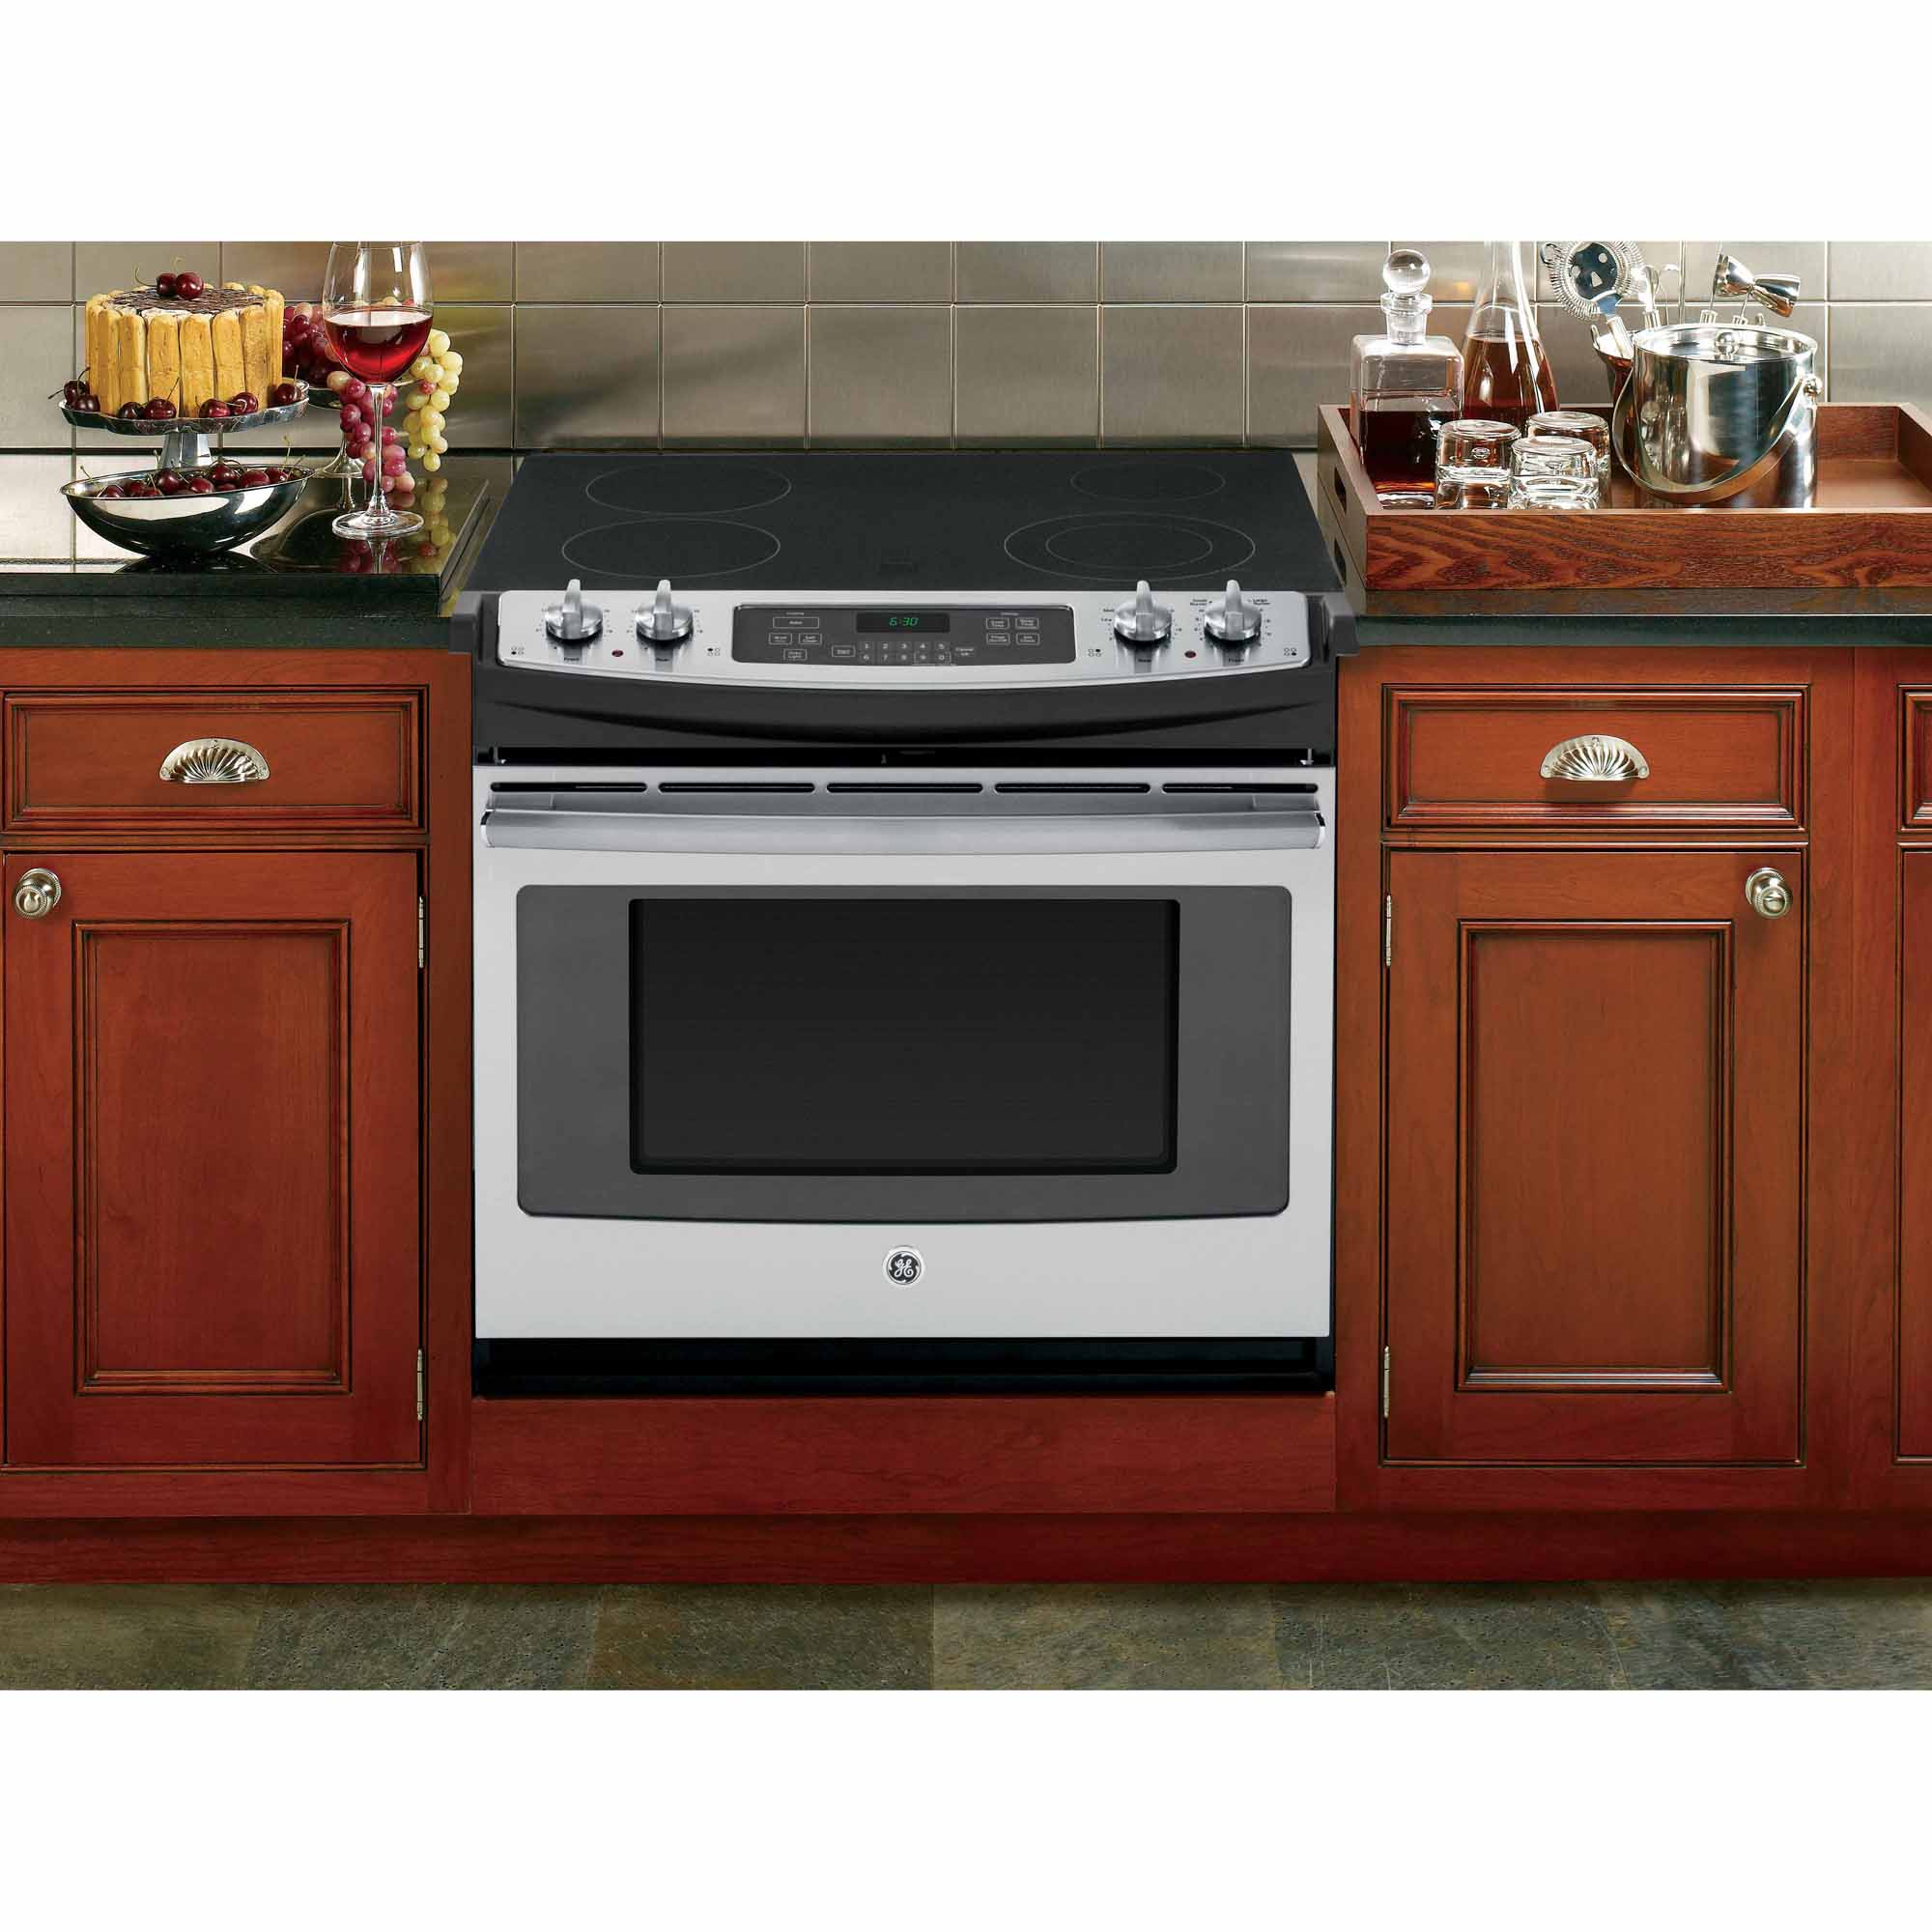 GE Appliances 30" Drop in Electric Range Stainless Steel